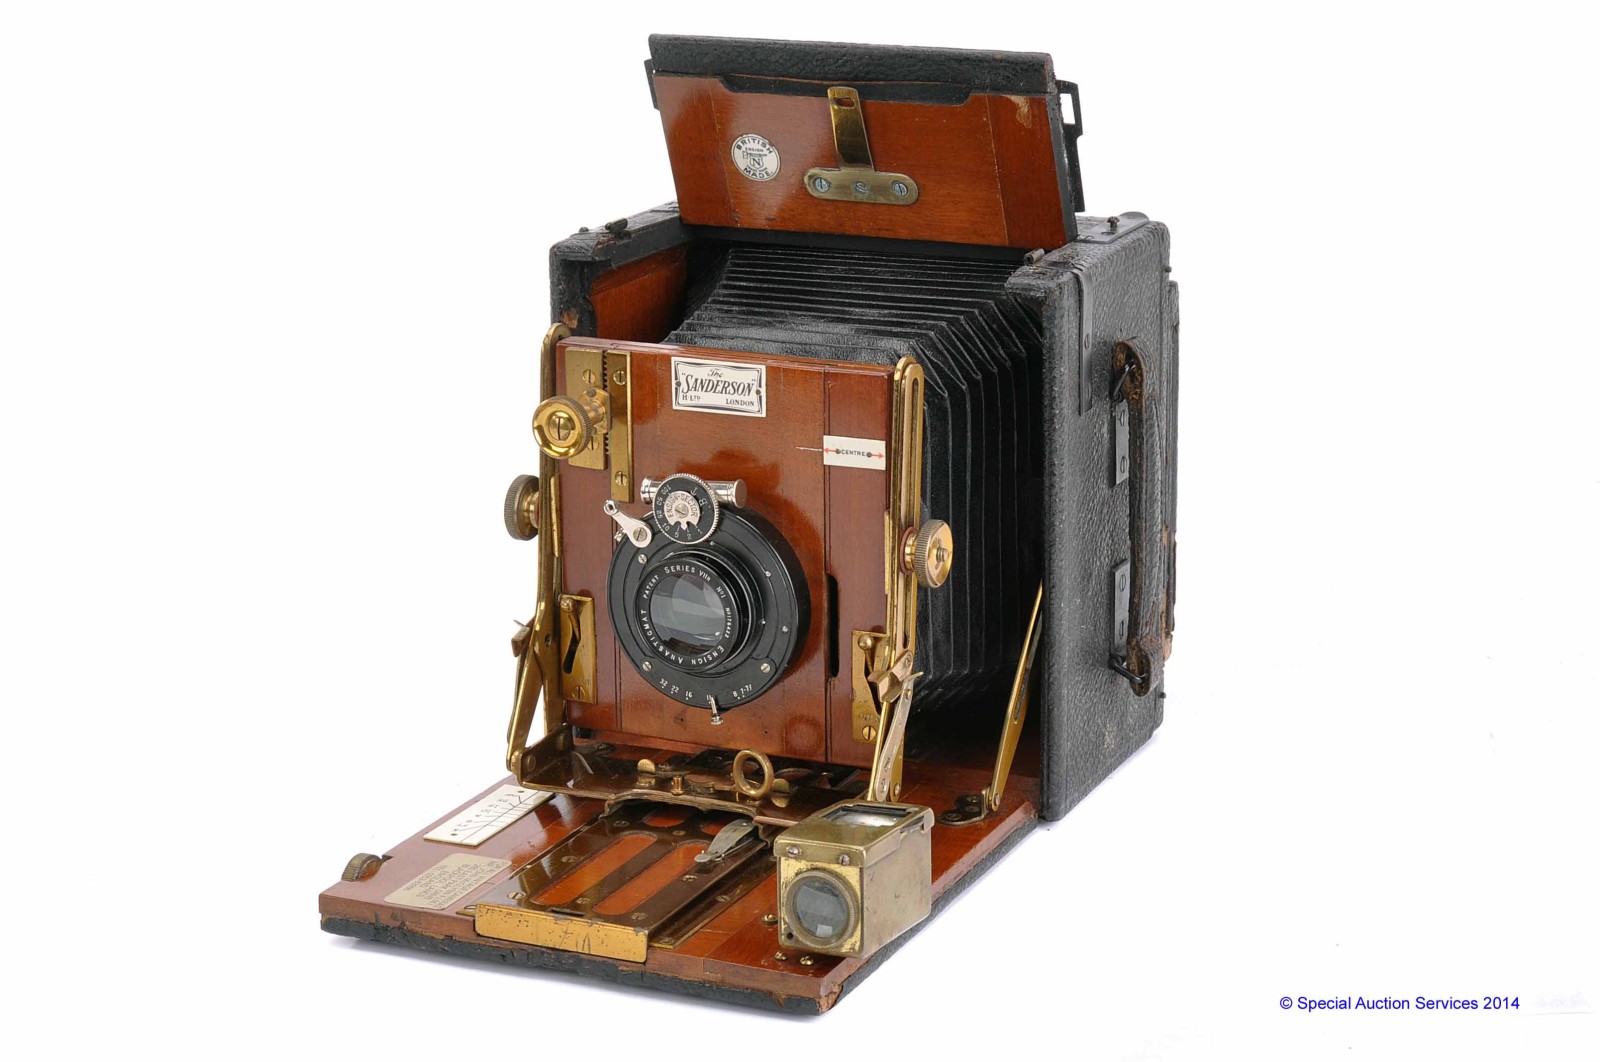 A Sanderson Hand Camera, with Ensign Anastigmat Series VIIn No. 1 lens, body, F-G, damage to waist